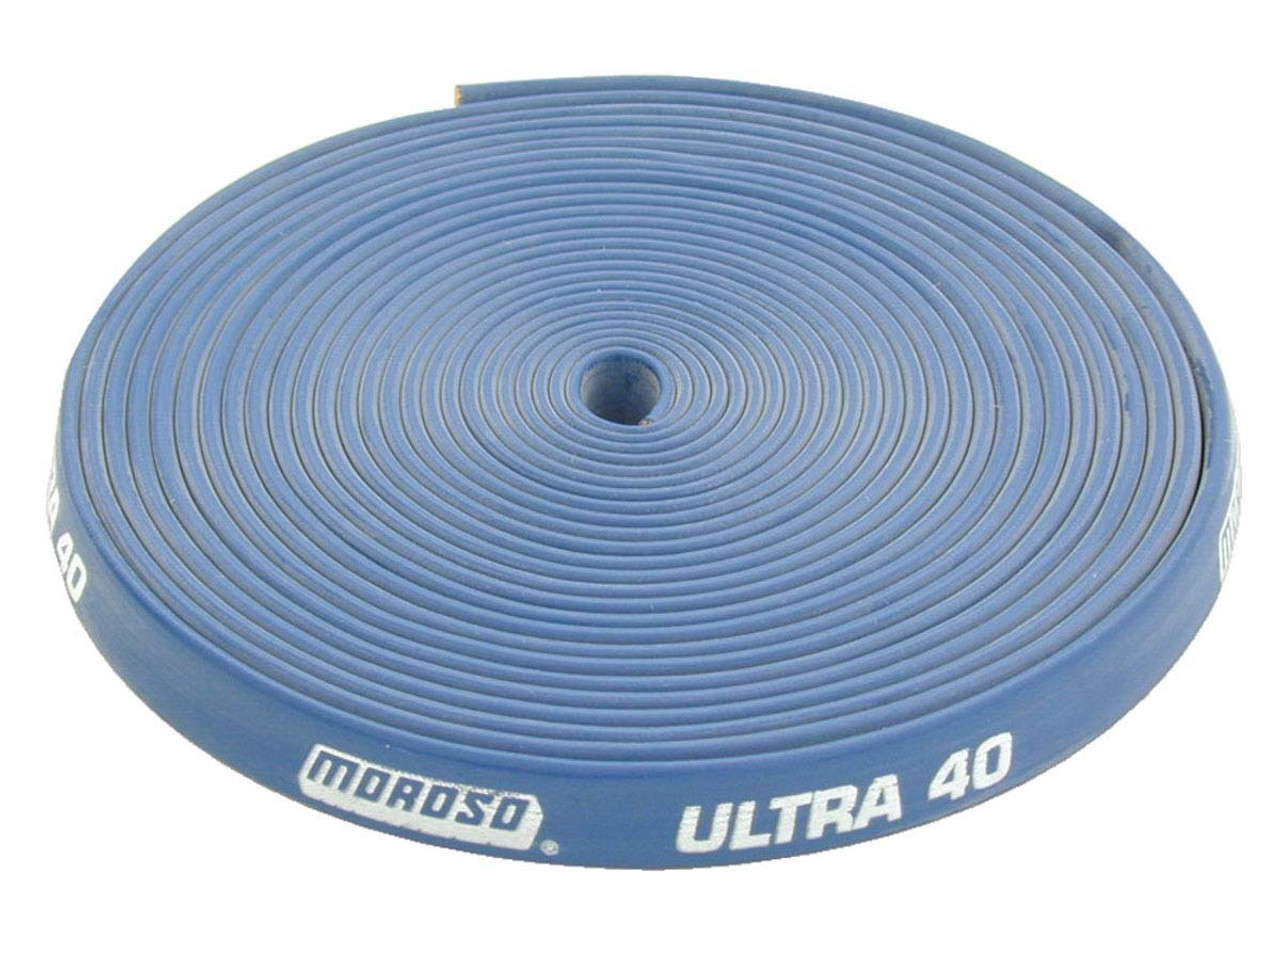 Ultra 40 Wire Sleeve - 25ft. Roll MOR72011